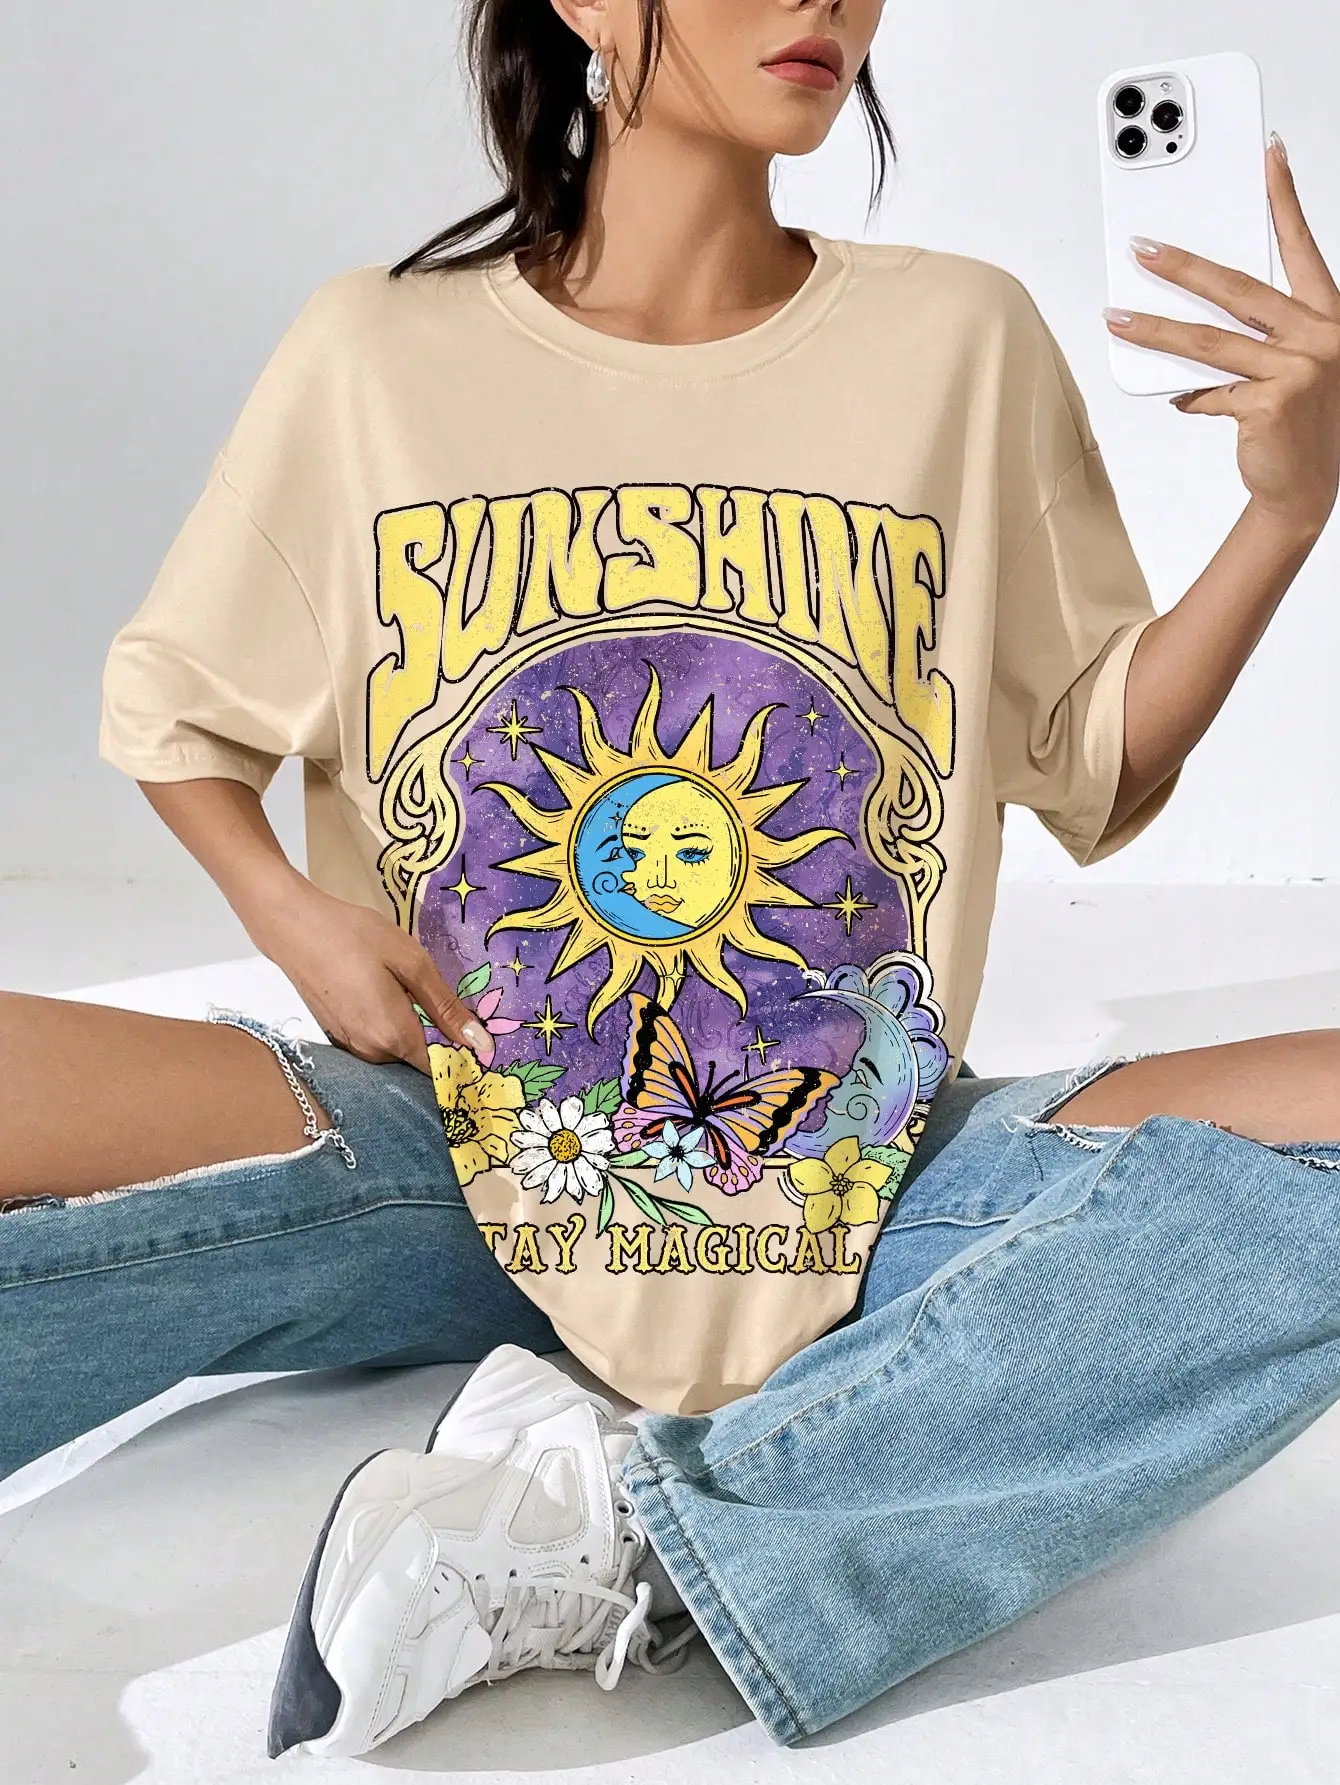 Fkatuzi Butterfly Oversized Vintage T Shirts for Women Sun and Moon Graphic Tee Casual Cotton Crewneck Short Sleeve Gray Tops